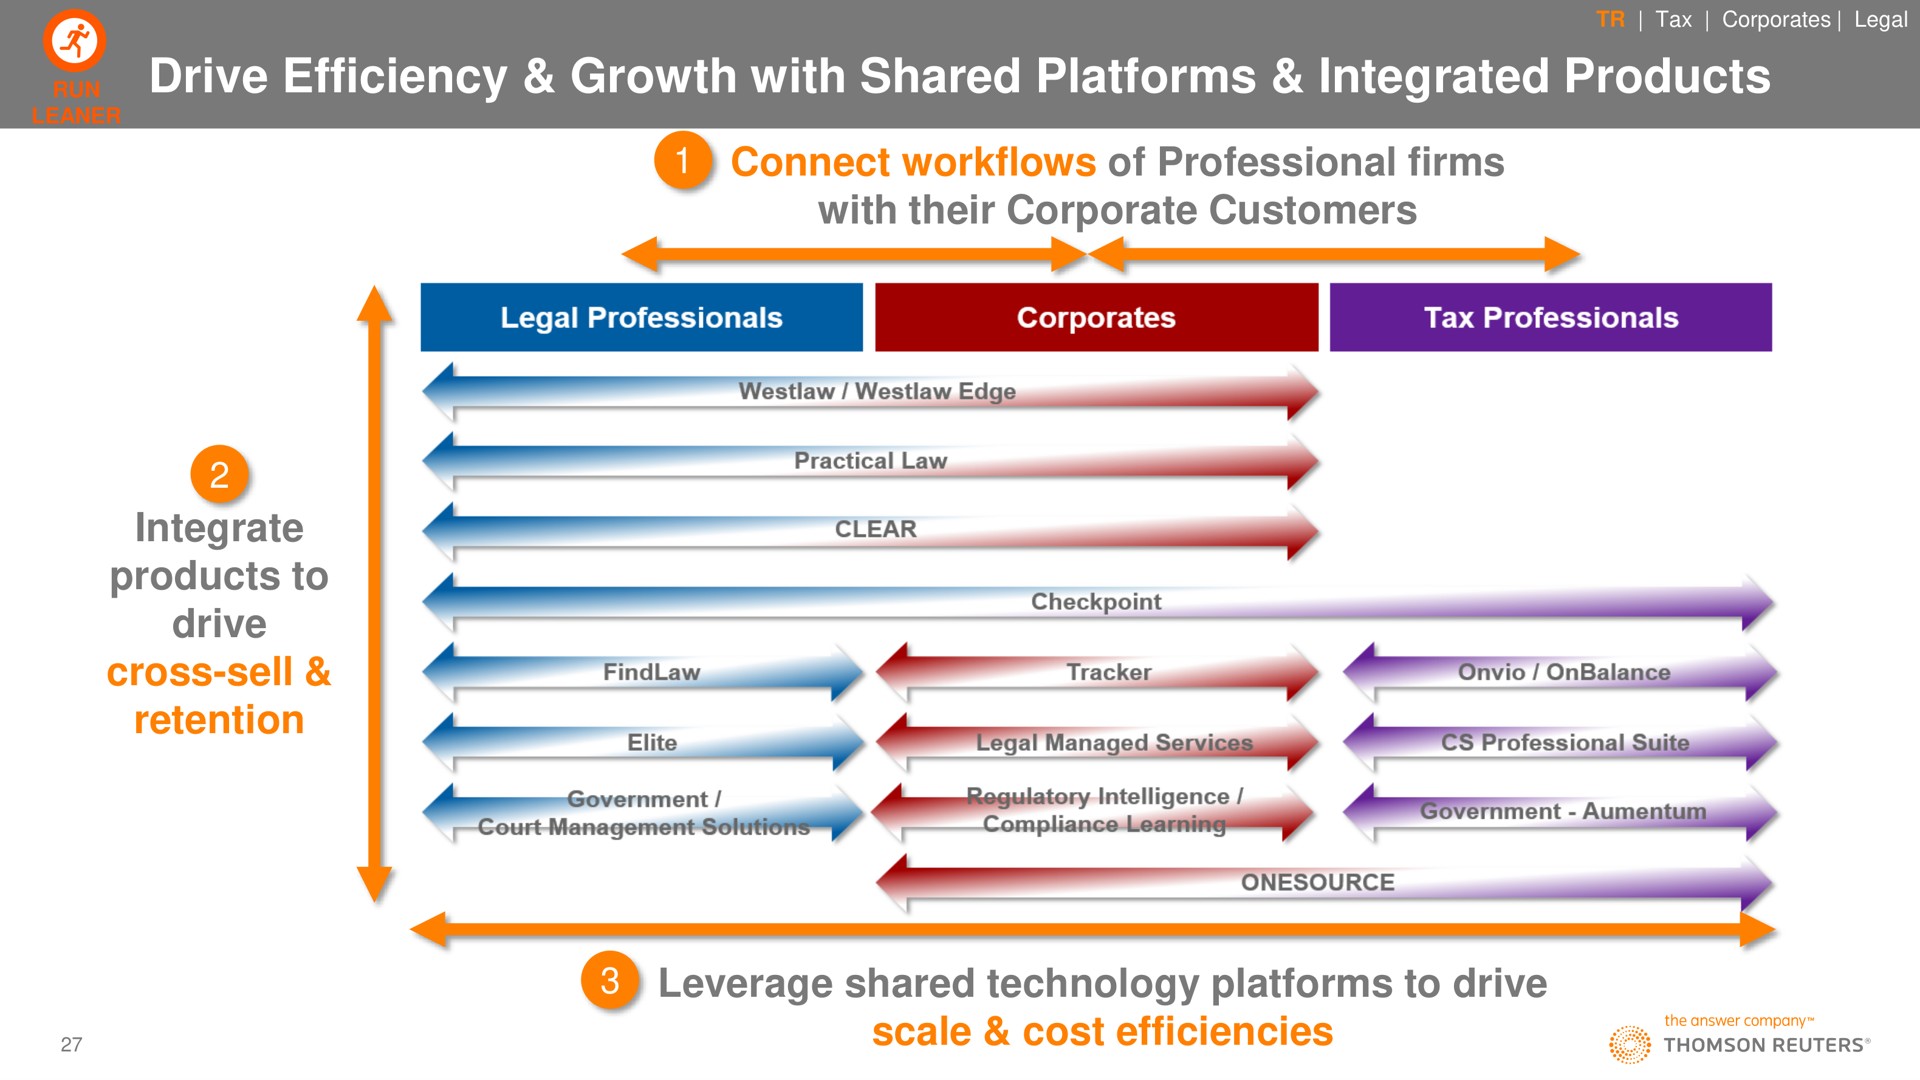 drive efficiency growth with shared platforms integrated products connect of professional firms with their corporate customers integrate products to drive cross sell retention leverage shared technology platforms to drive scale cost efficiencies | Thomson Reuters